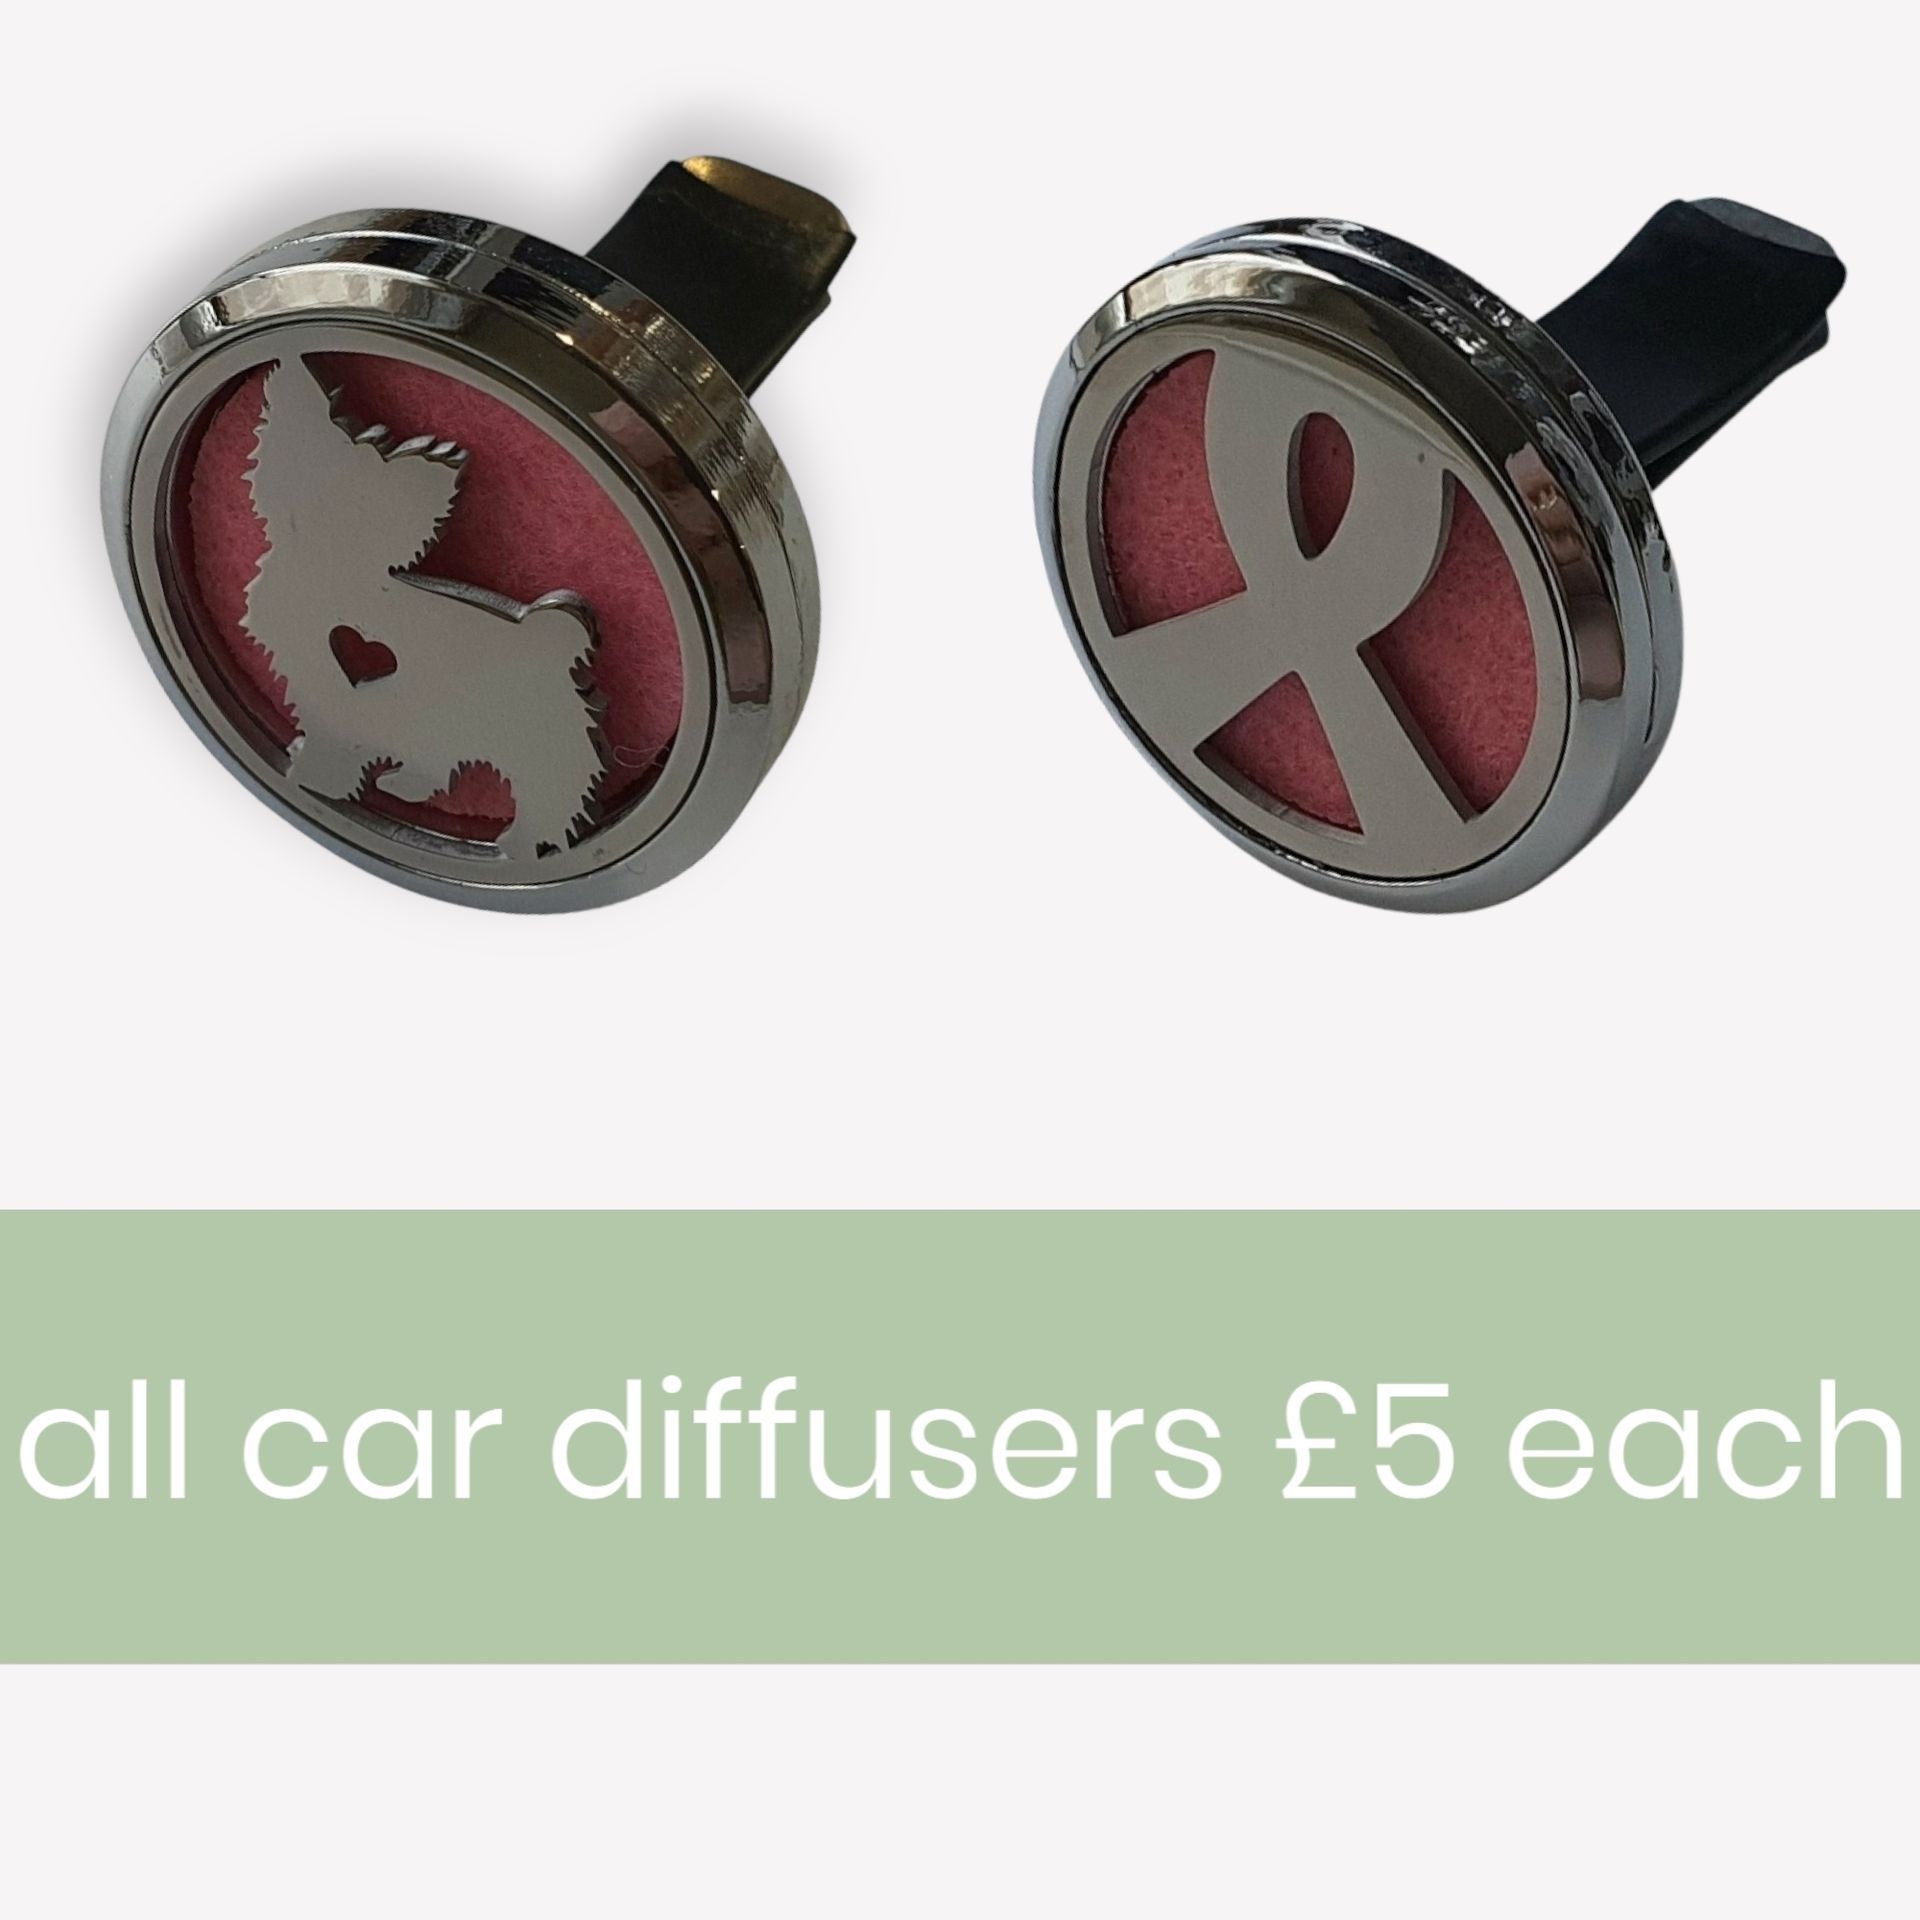 offer applies to all car diffusers